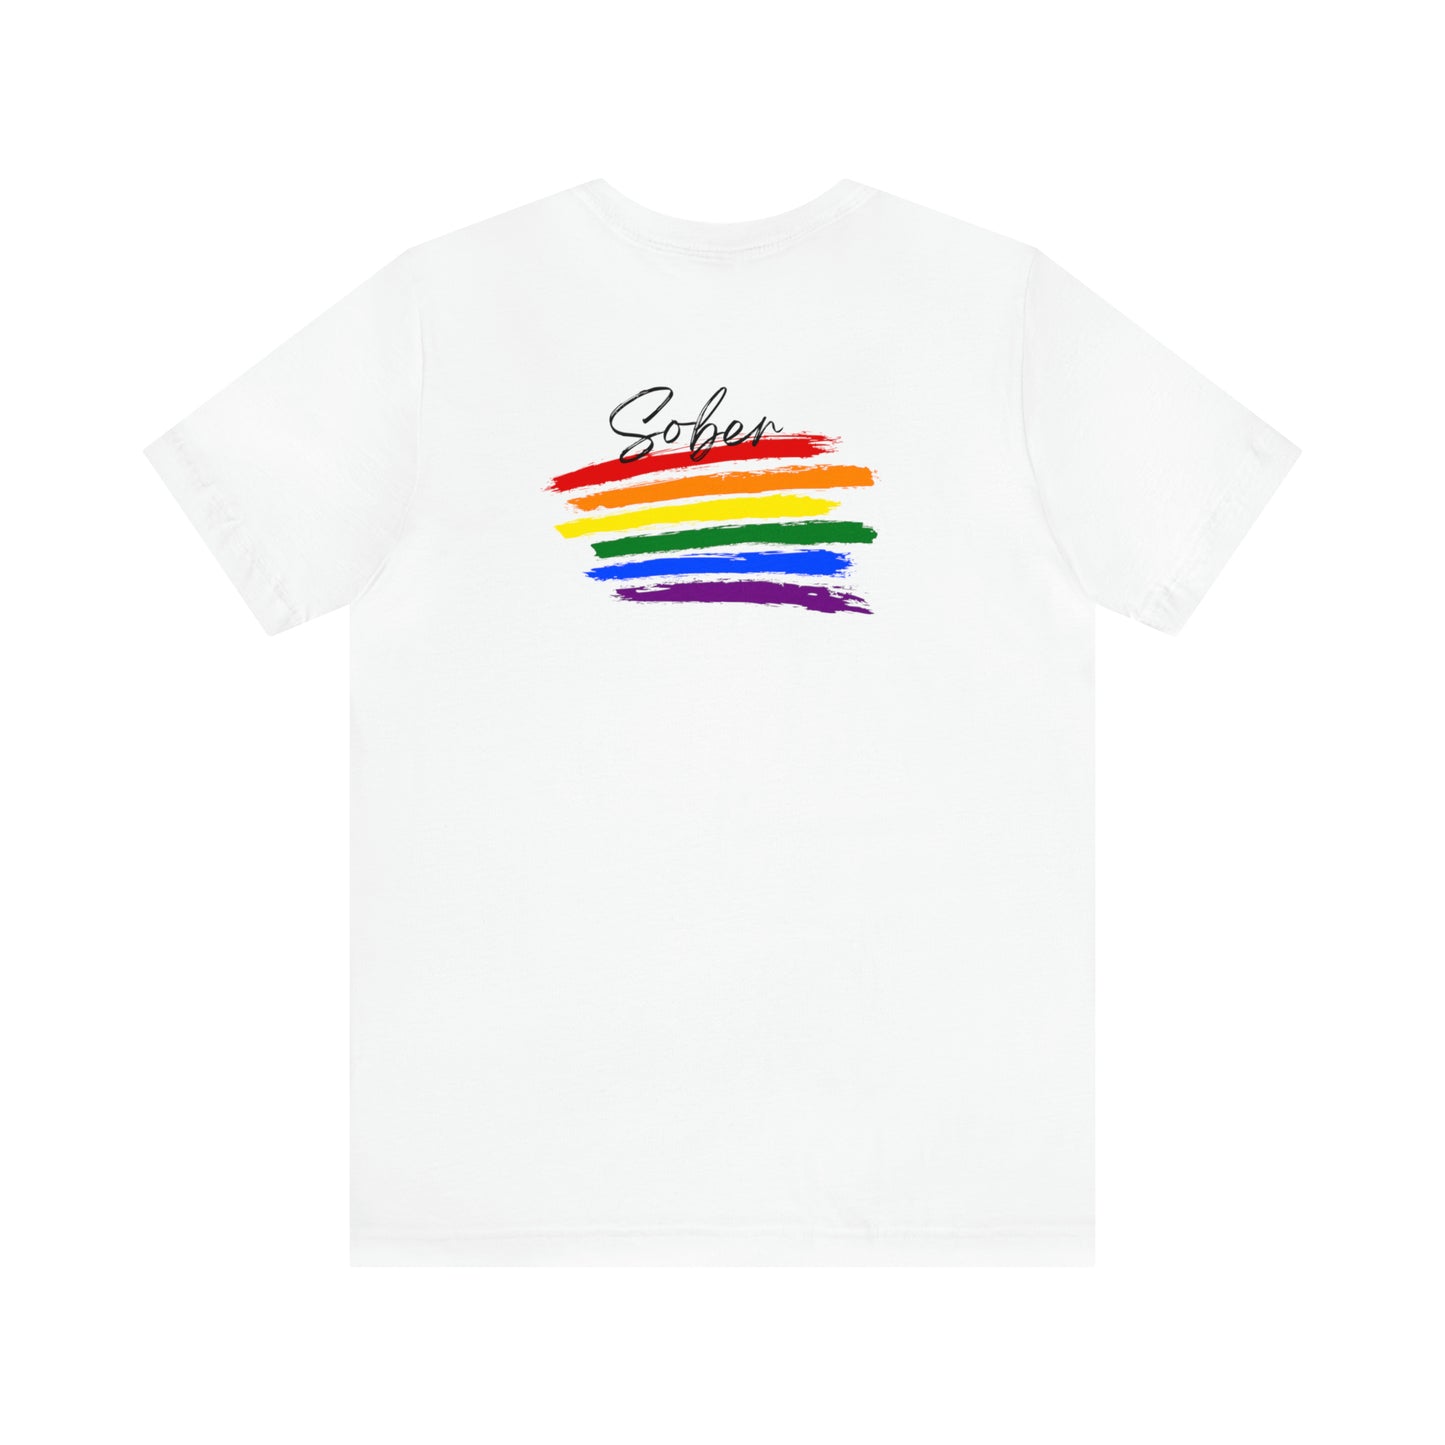 "Rainbow Stripes" Two Sided Unisex Tee - Pride Collection